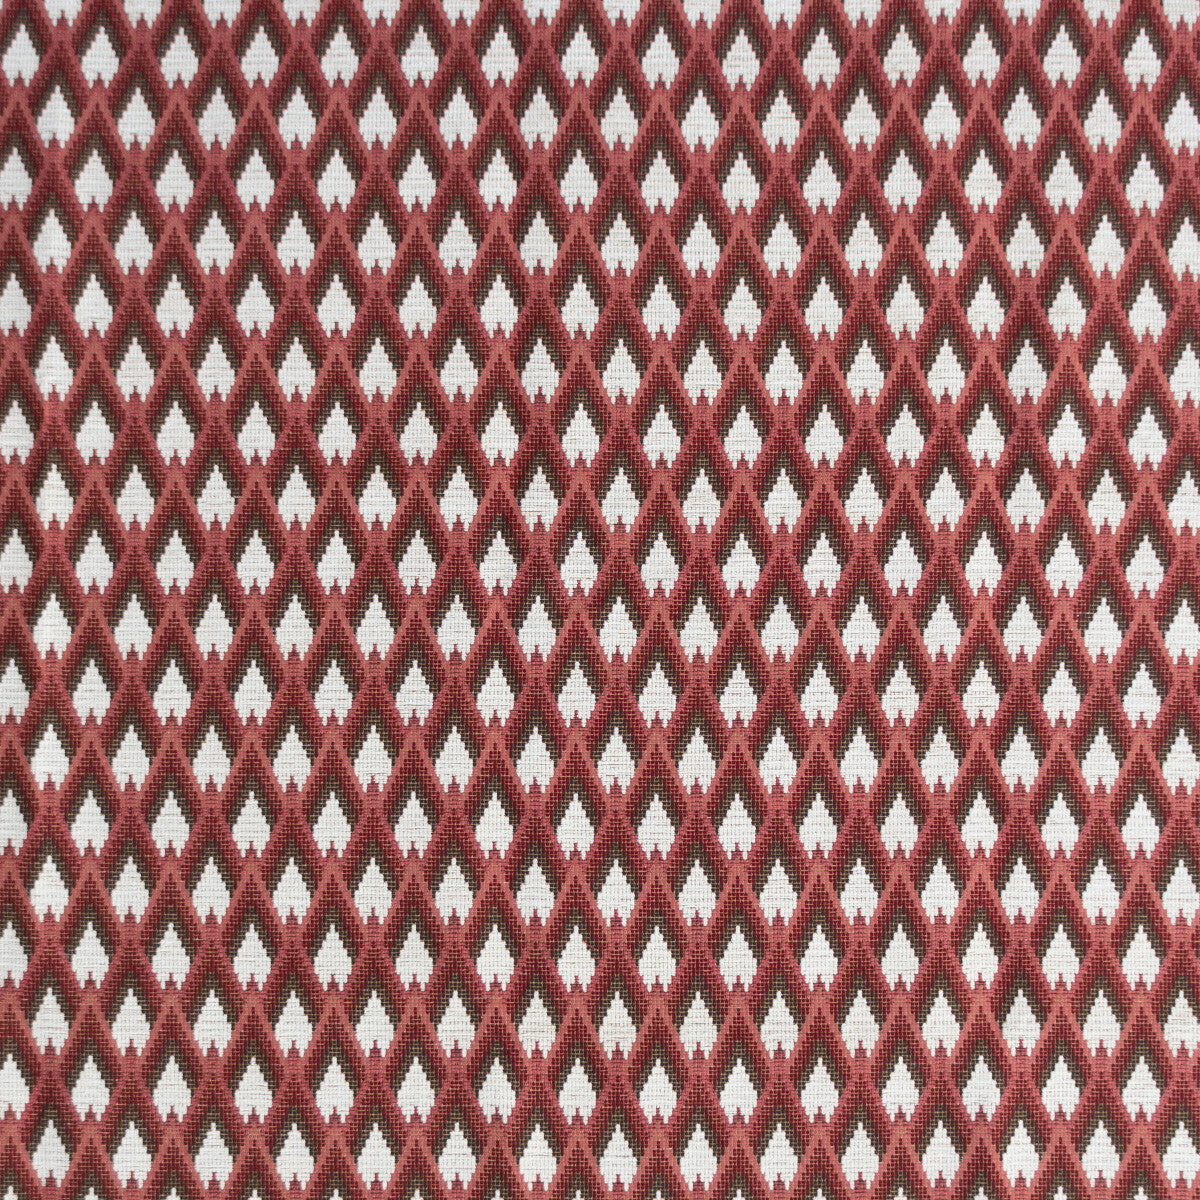 Peruyes fabric in rojo color - pattern LCT1078.005.0 - by Gaston y Daniela in the Lorenzo Castillo VII The Rectory collection